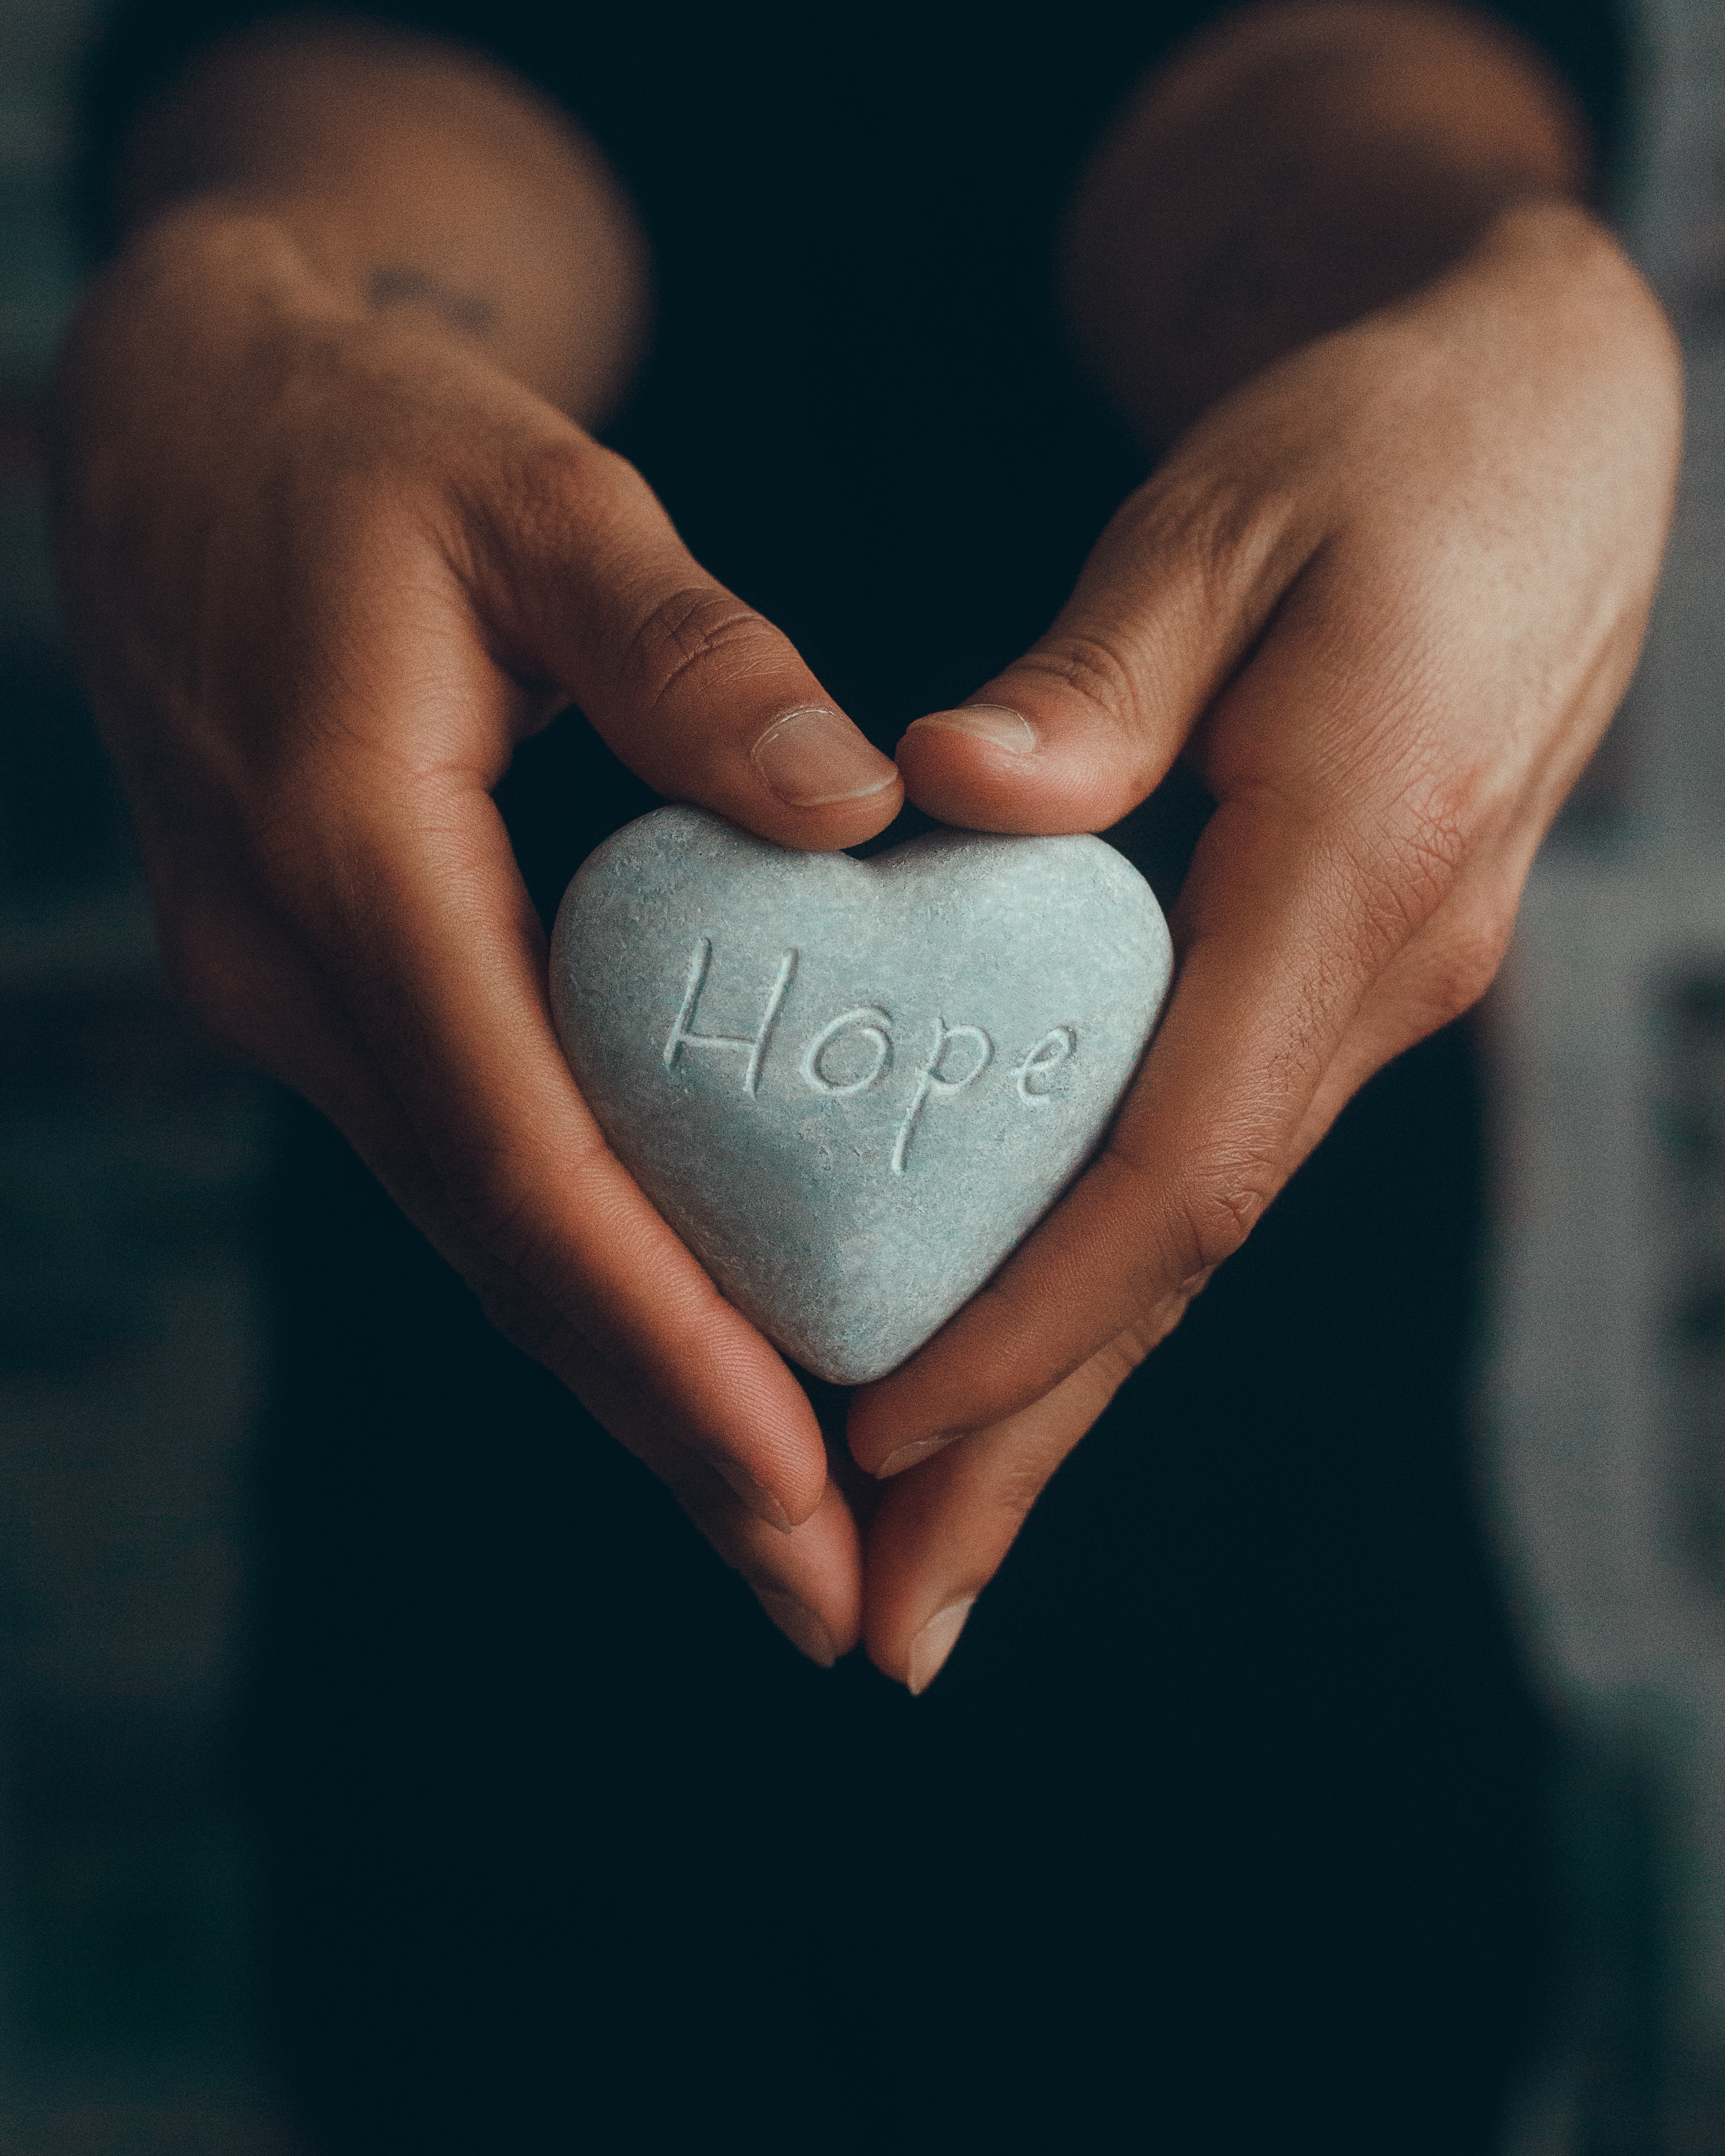 android words, hope, inscription, heart, rock, hands, stone, word